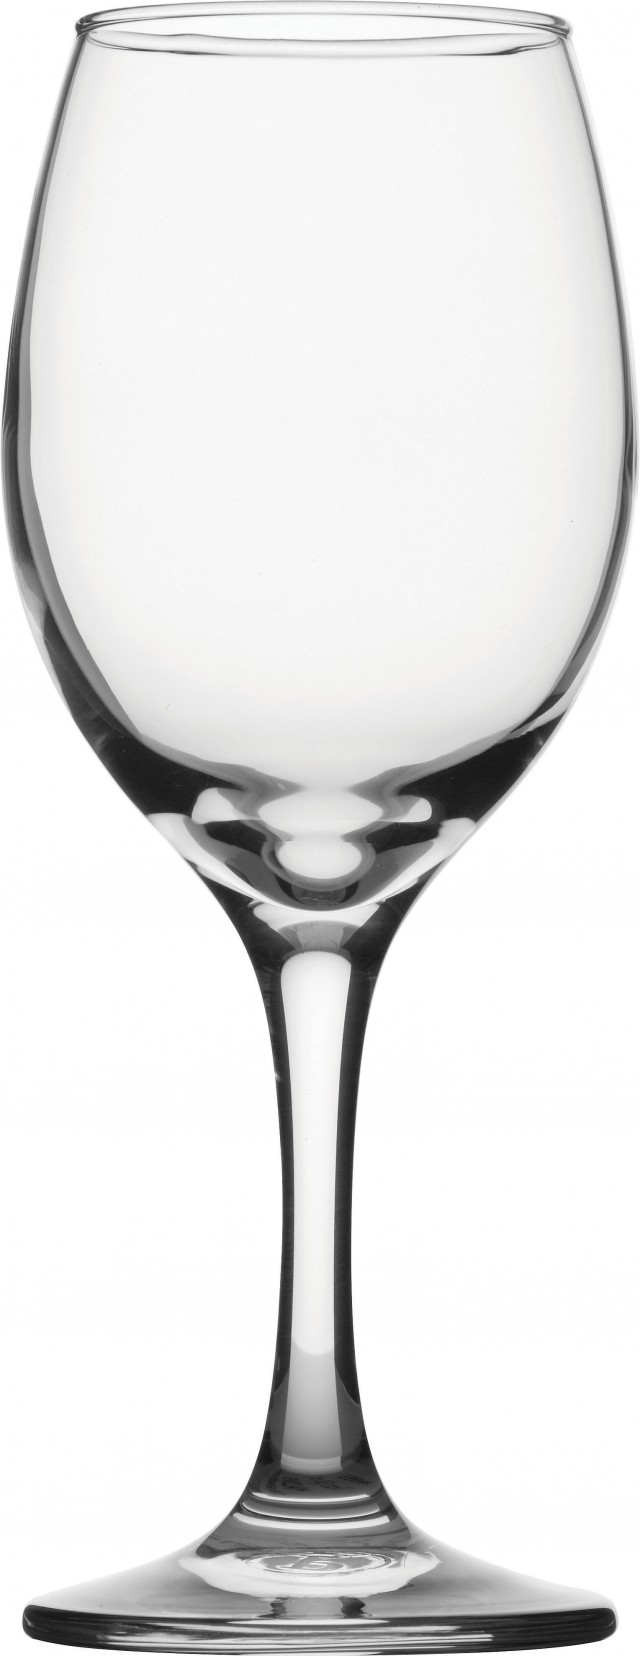 clipart glass of wine - photo #40